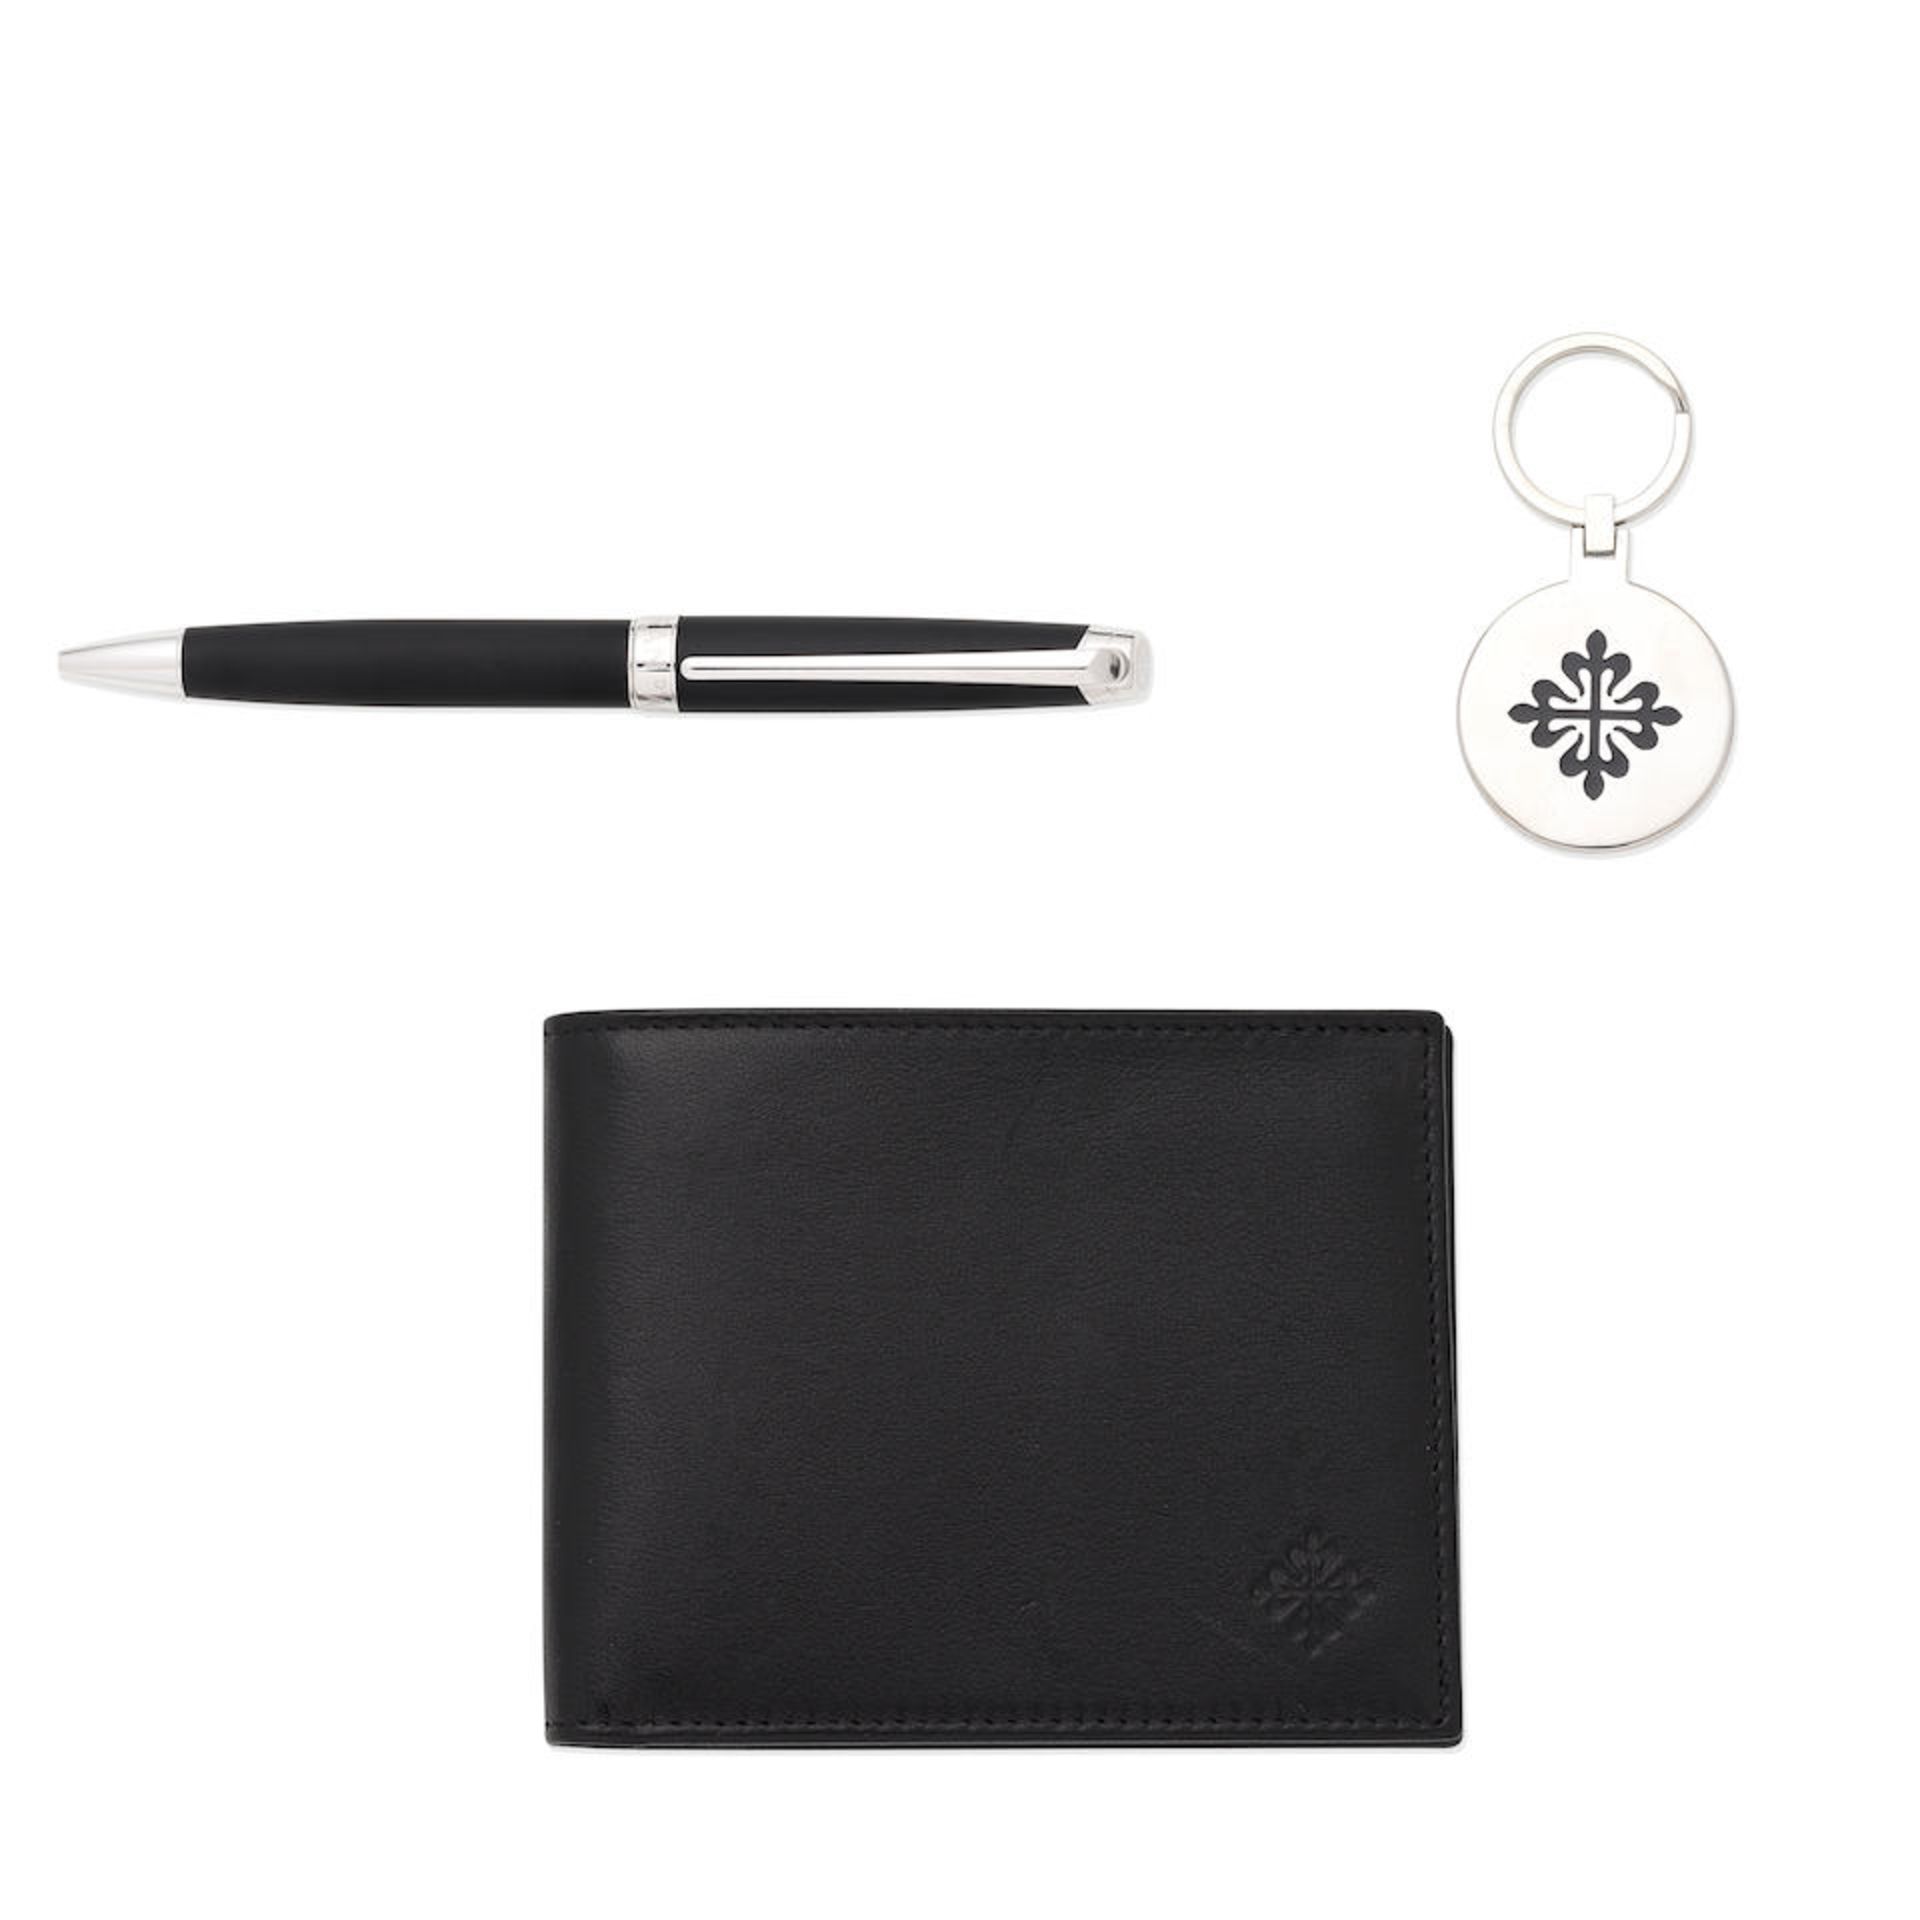 Patek Philippe. A wallet, pen and key ring set Circa 2010 - Image 2 of 3